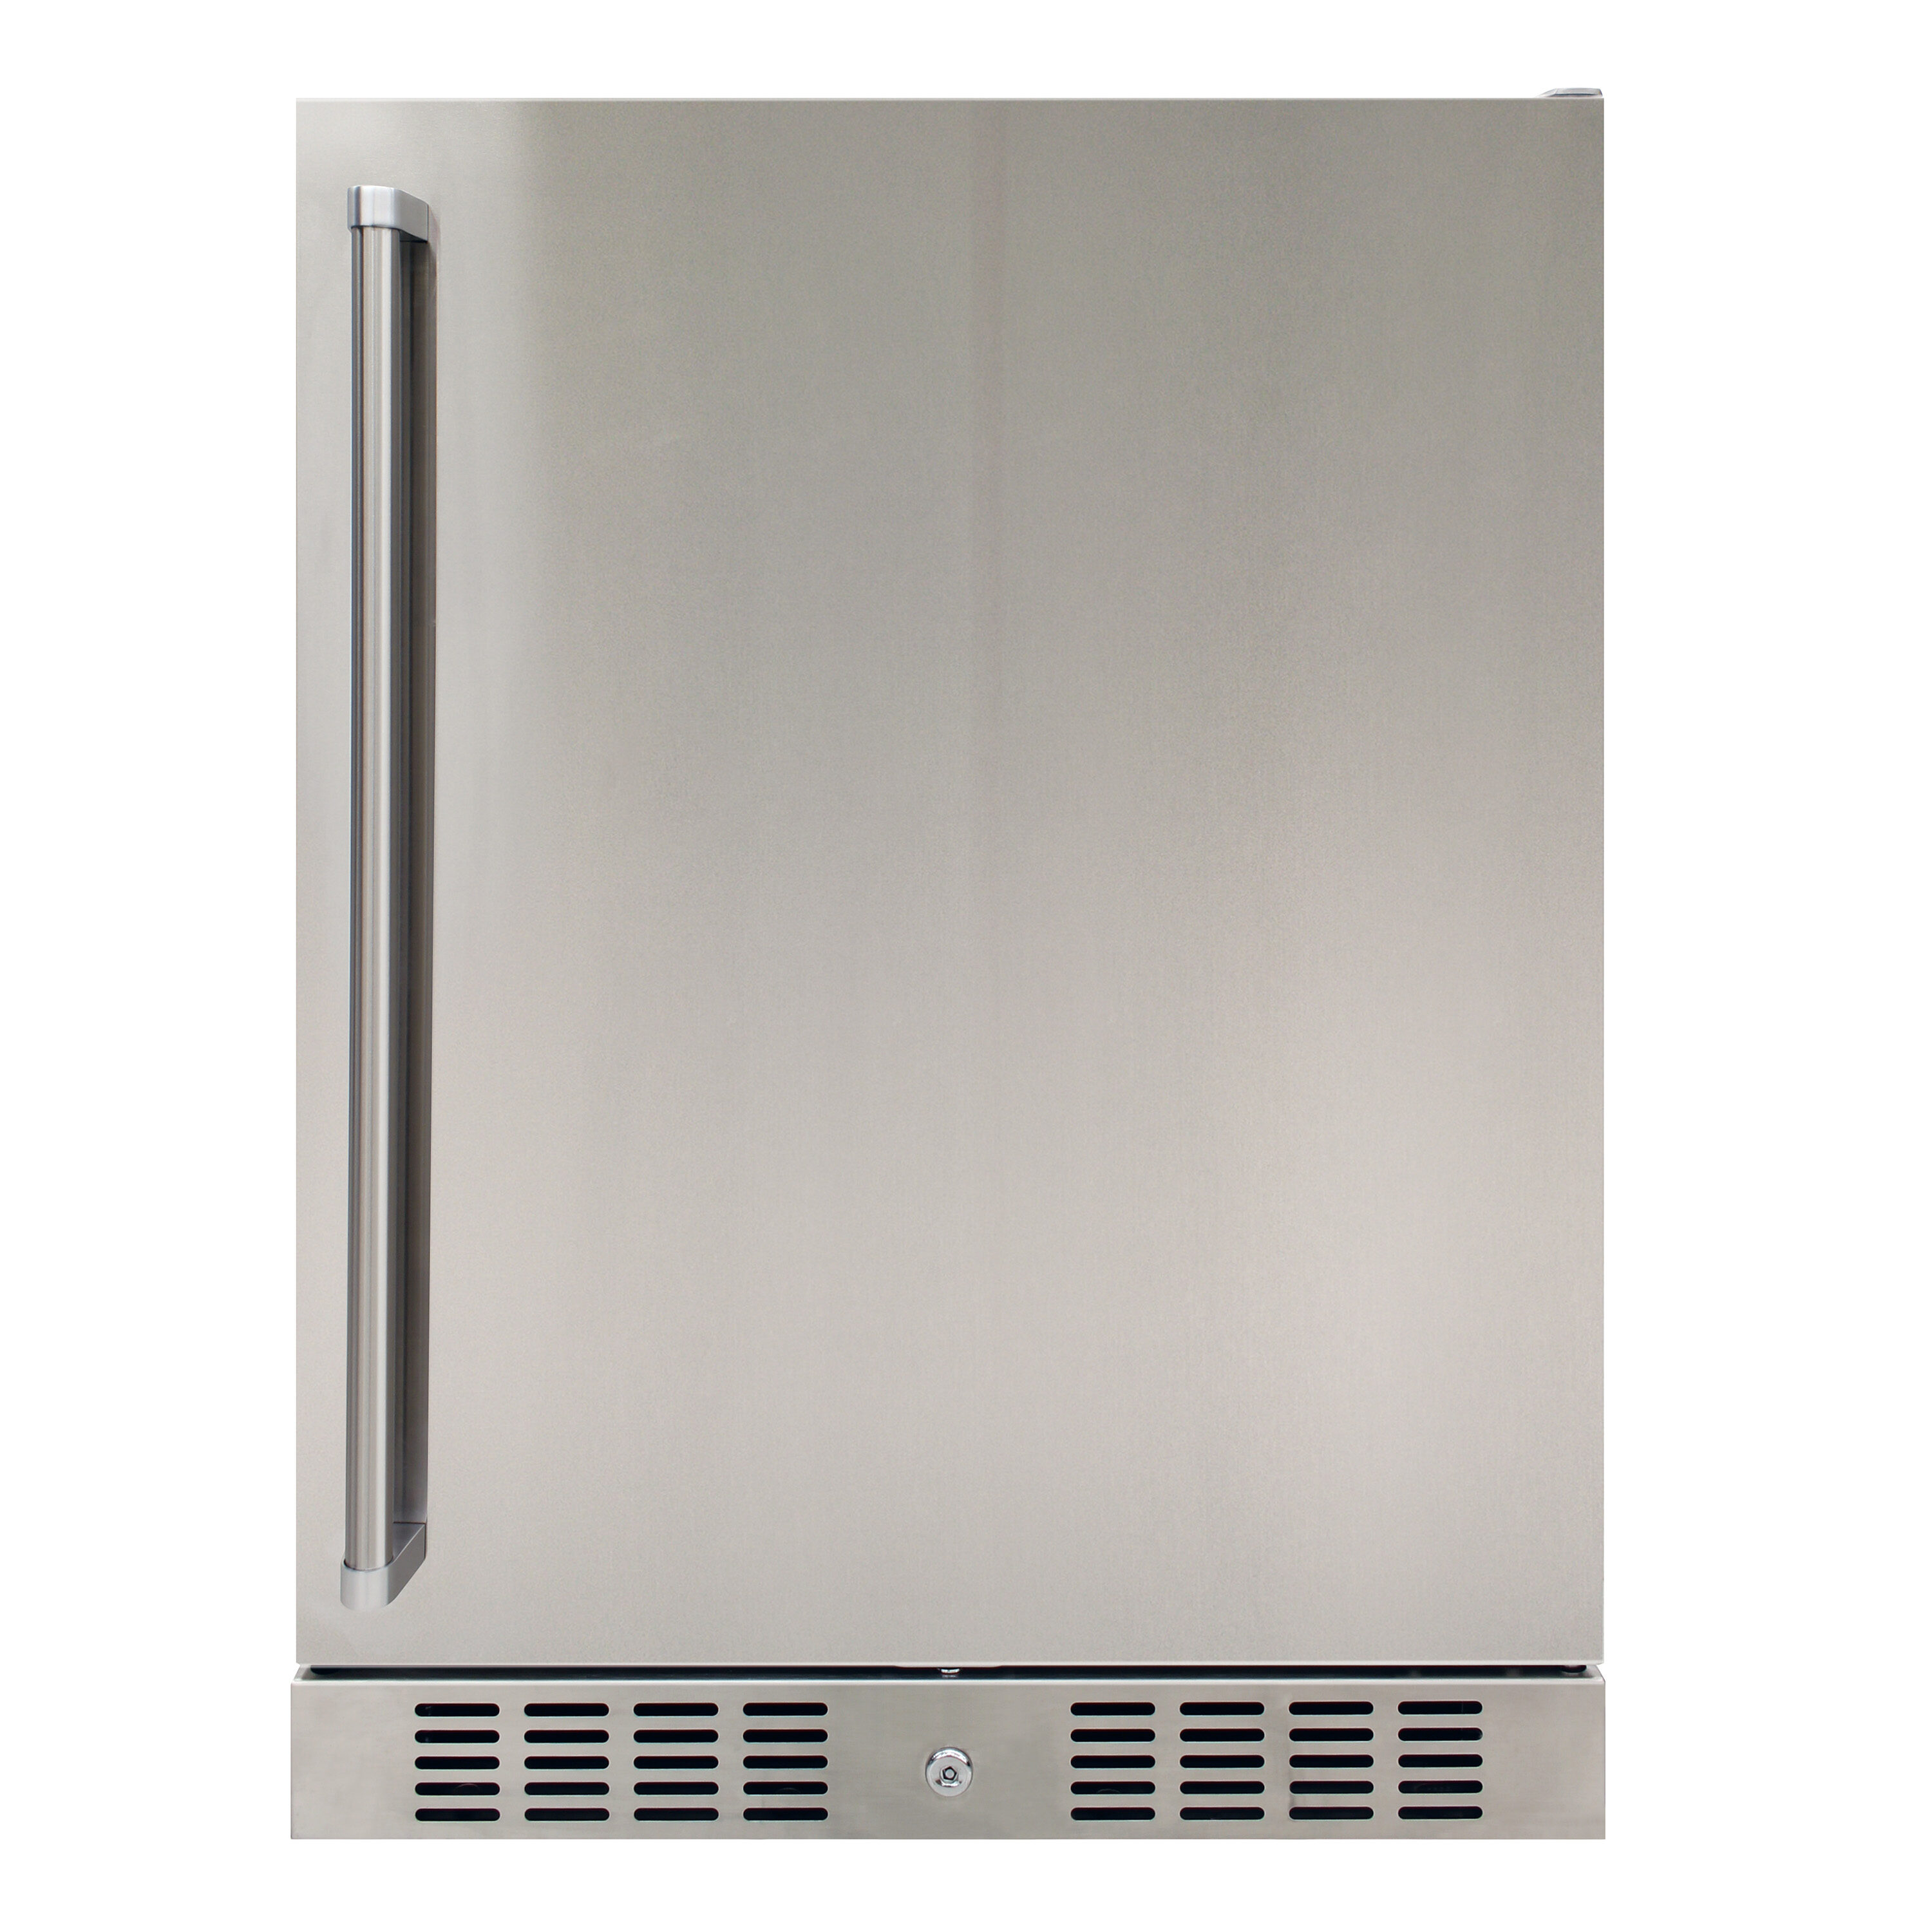 fridge with lock and key, fridge with lock and key Suppliers and